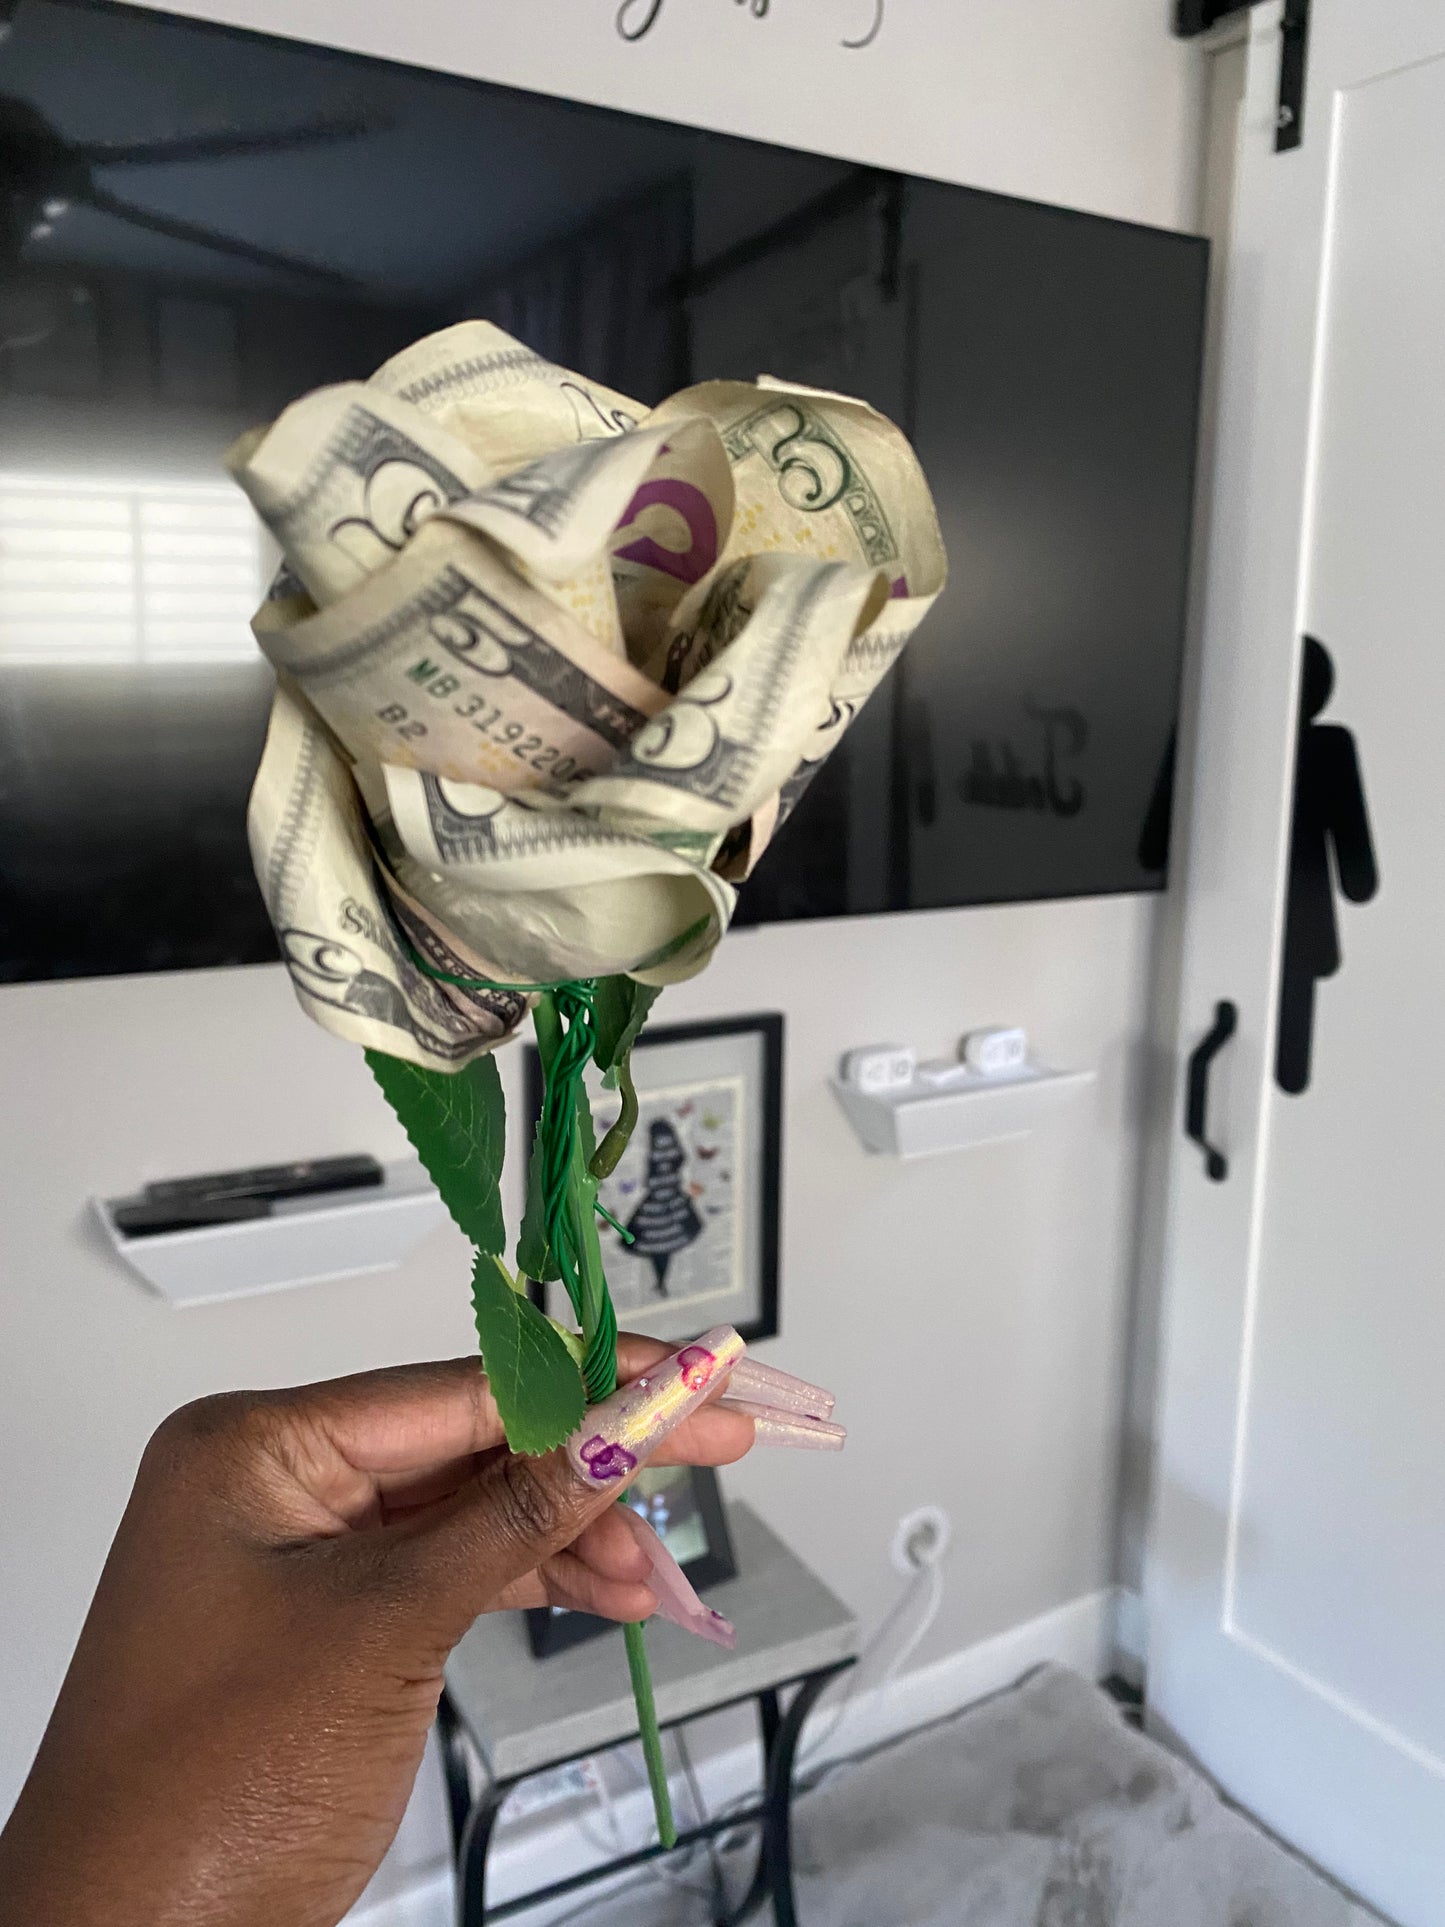 Money Roses from the Sovereign Grant